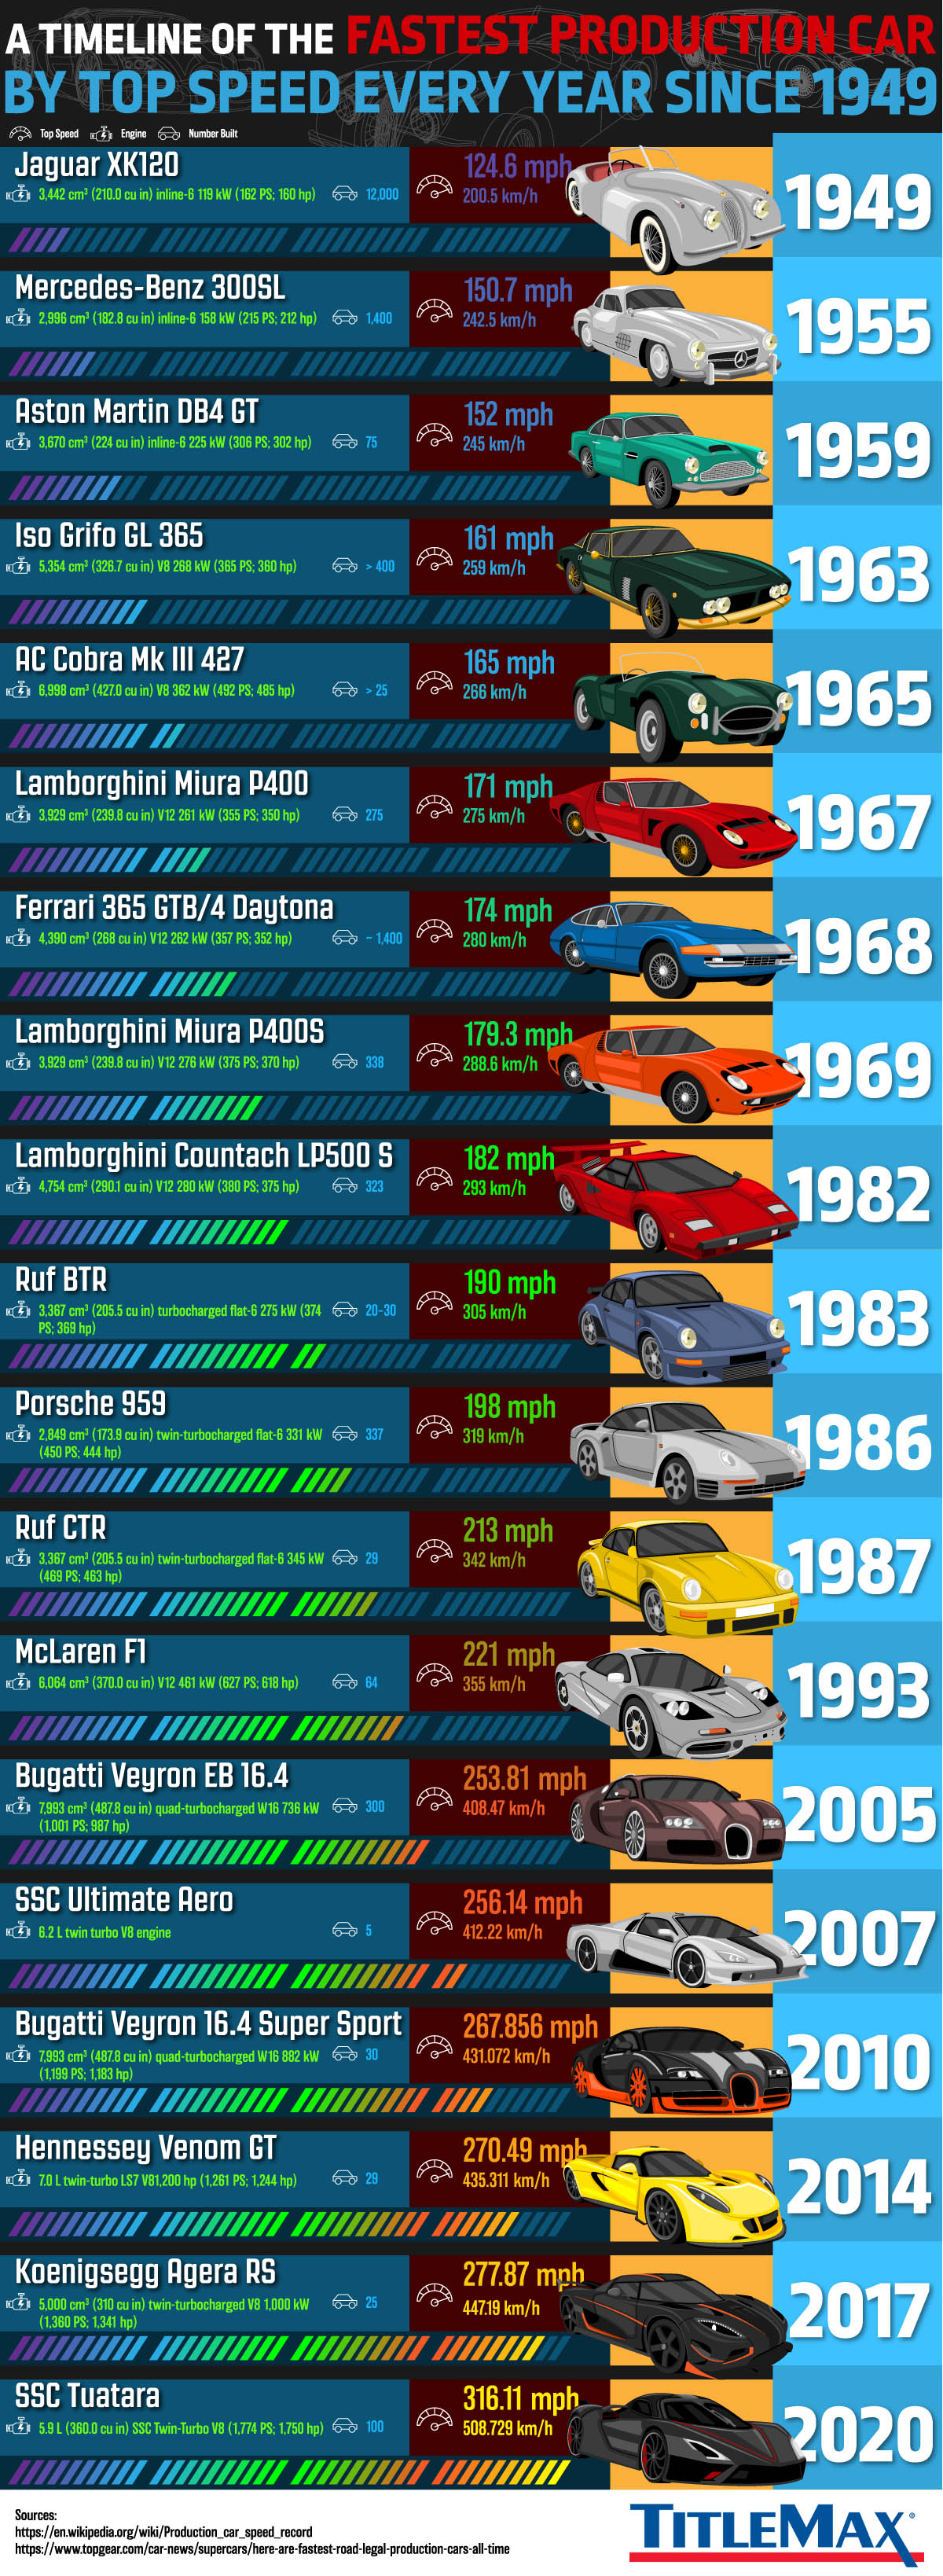 A Timeline of the Fastest Production Car by Top Speed Every Year Since 1949